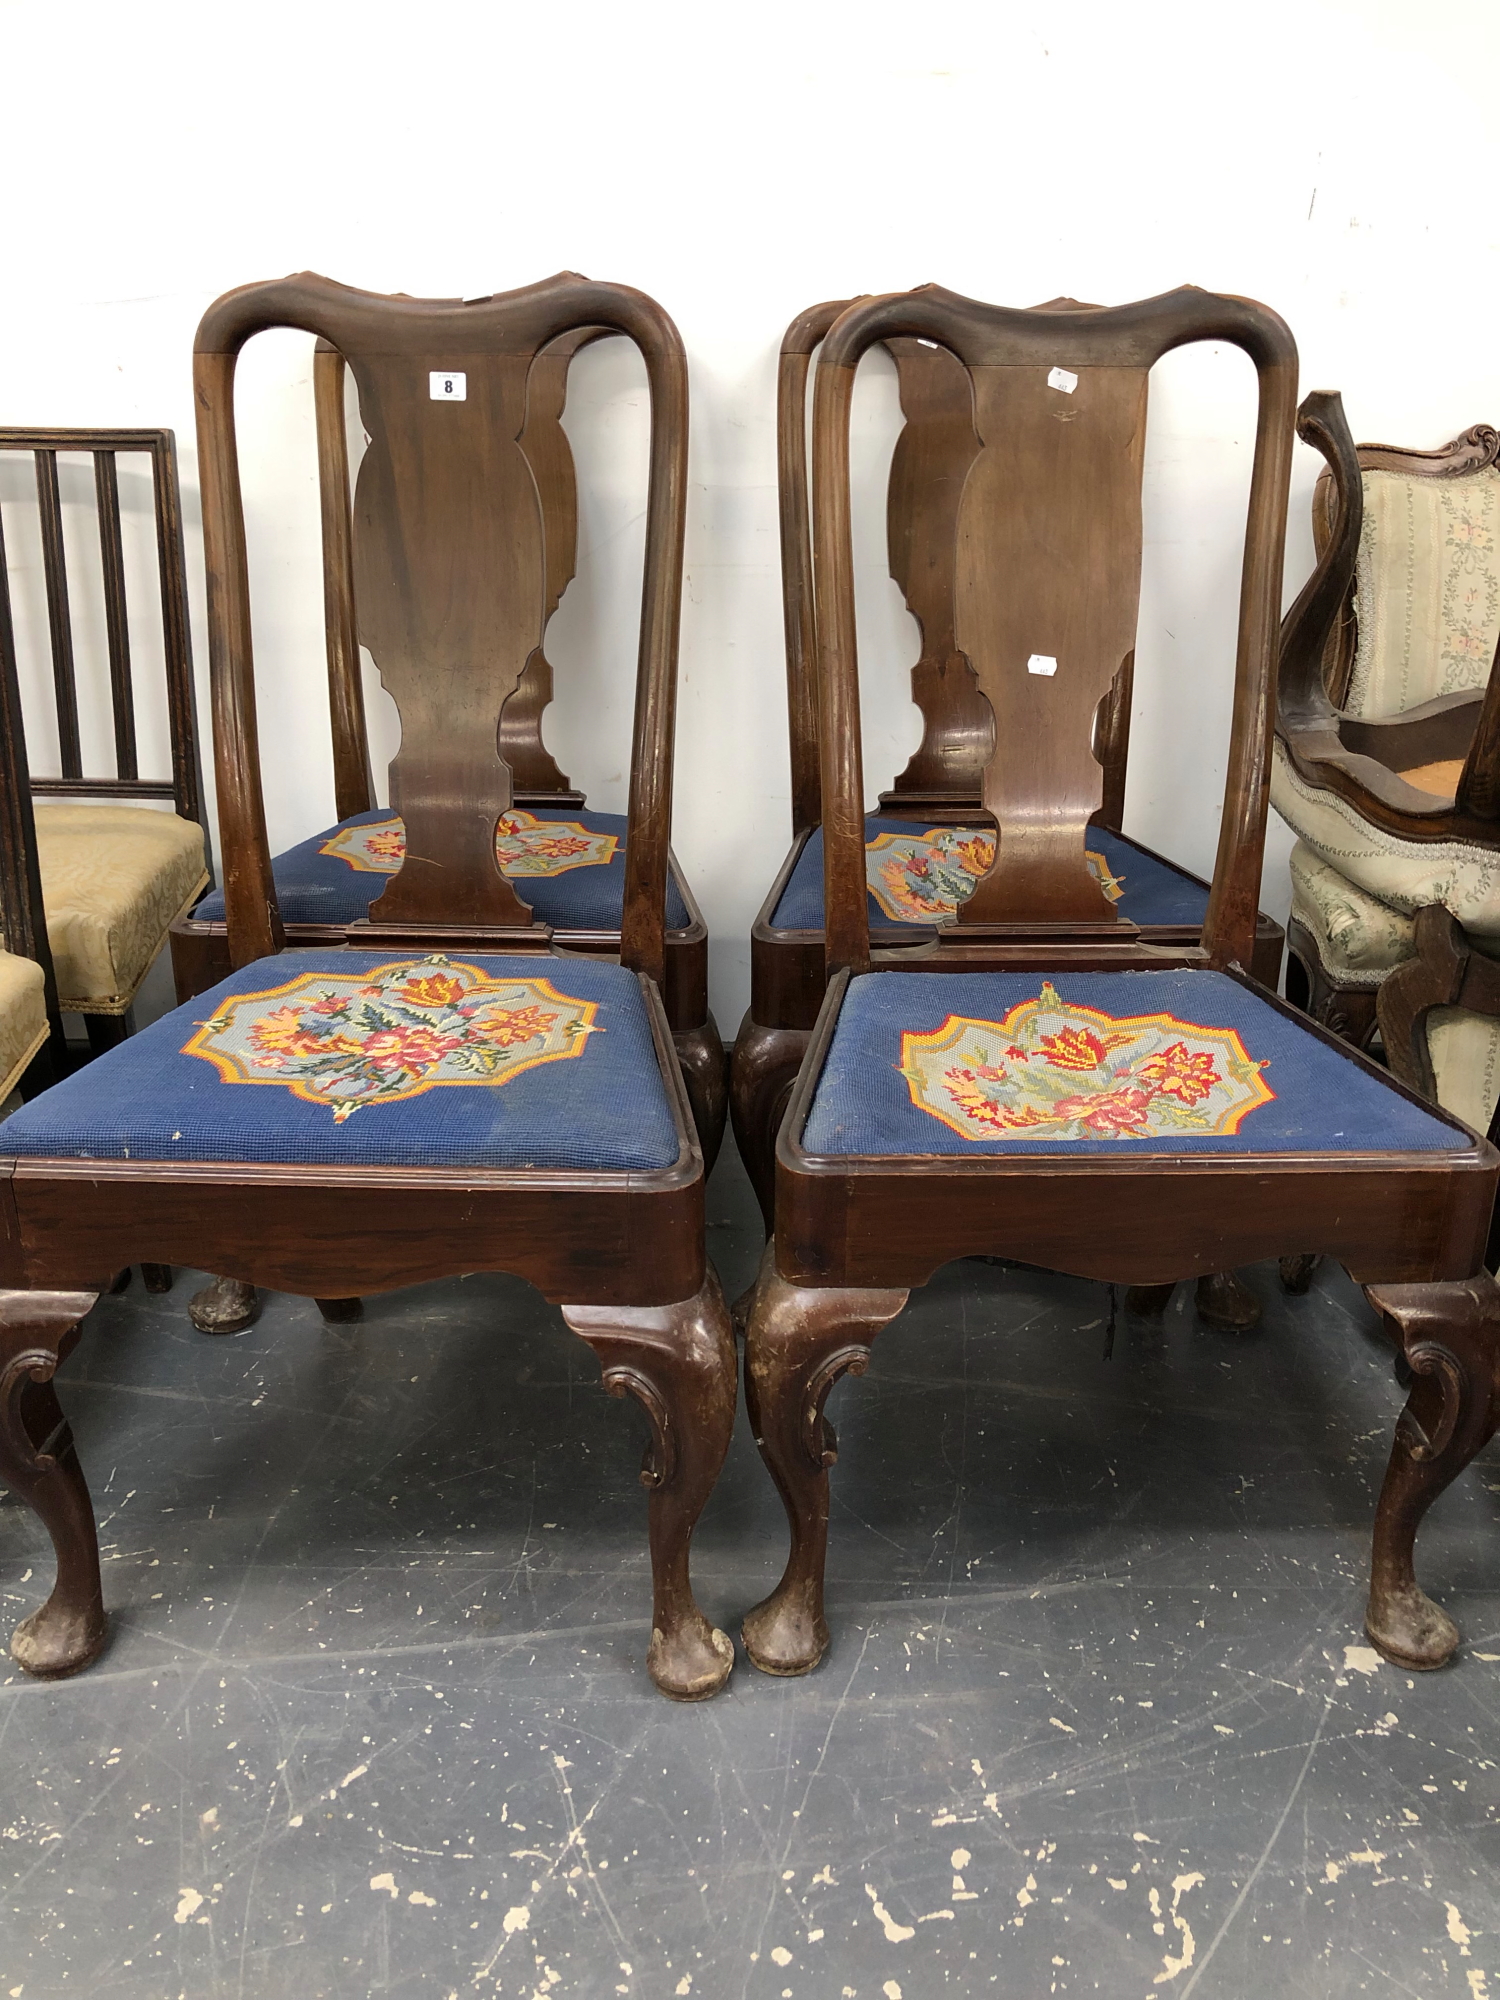 A SET OF FOUR GEORGE I STYLE MAHOGANY SPLAT BACK CHAIRS BY WARING & GILLOW.